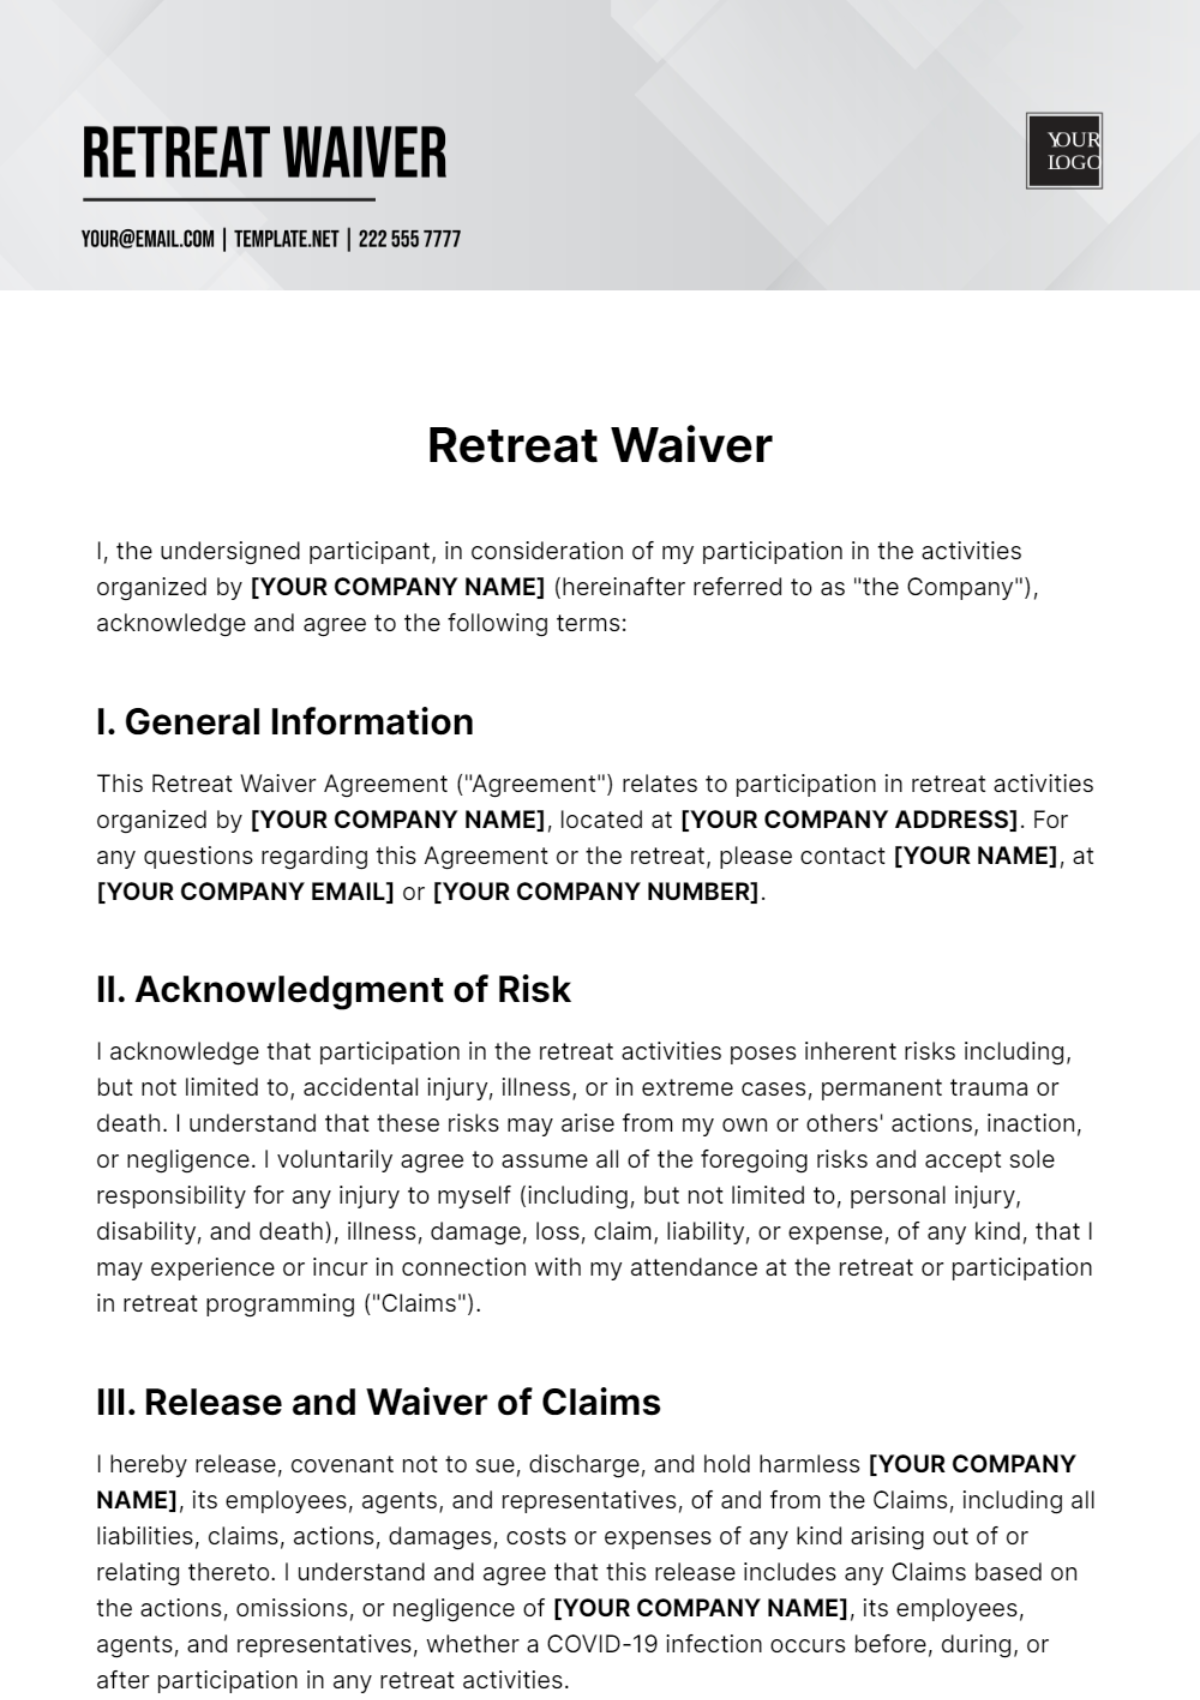 Retreat Waiver Template